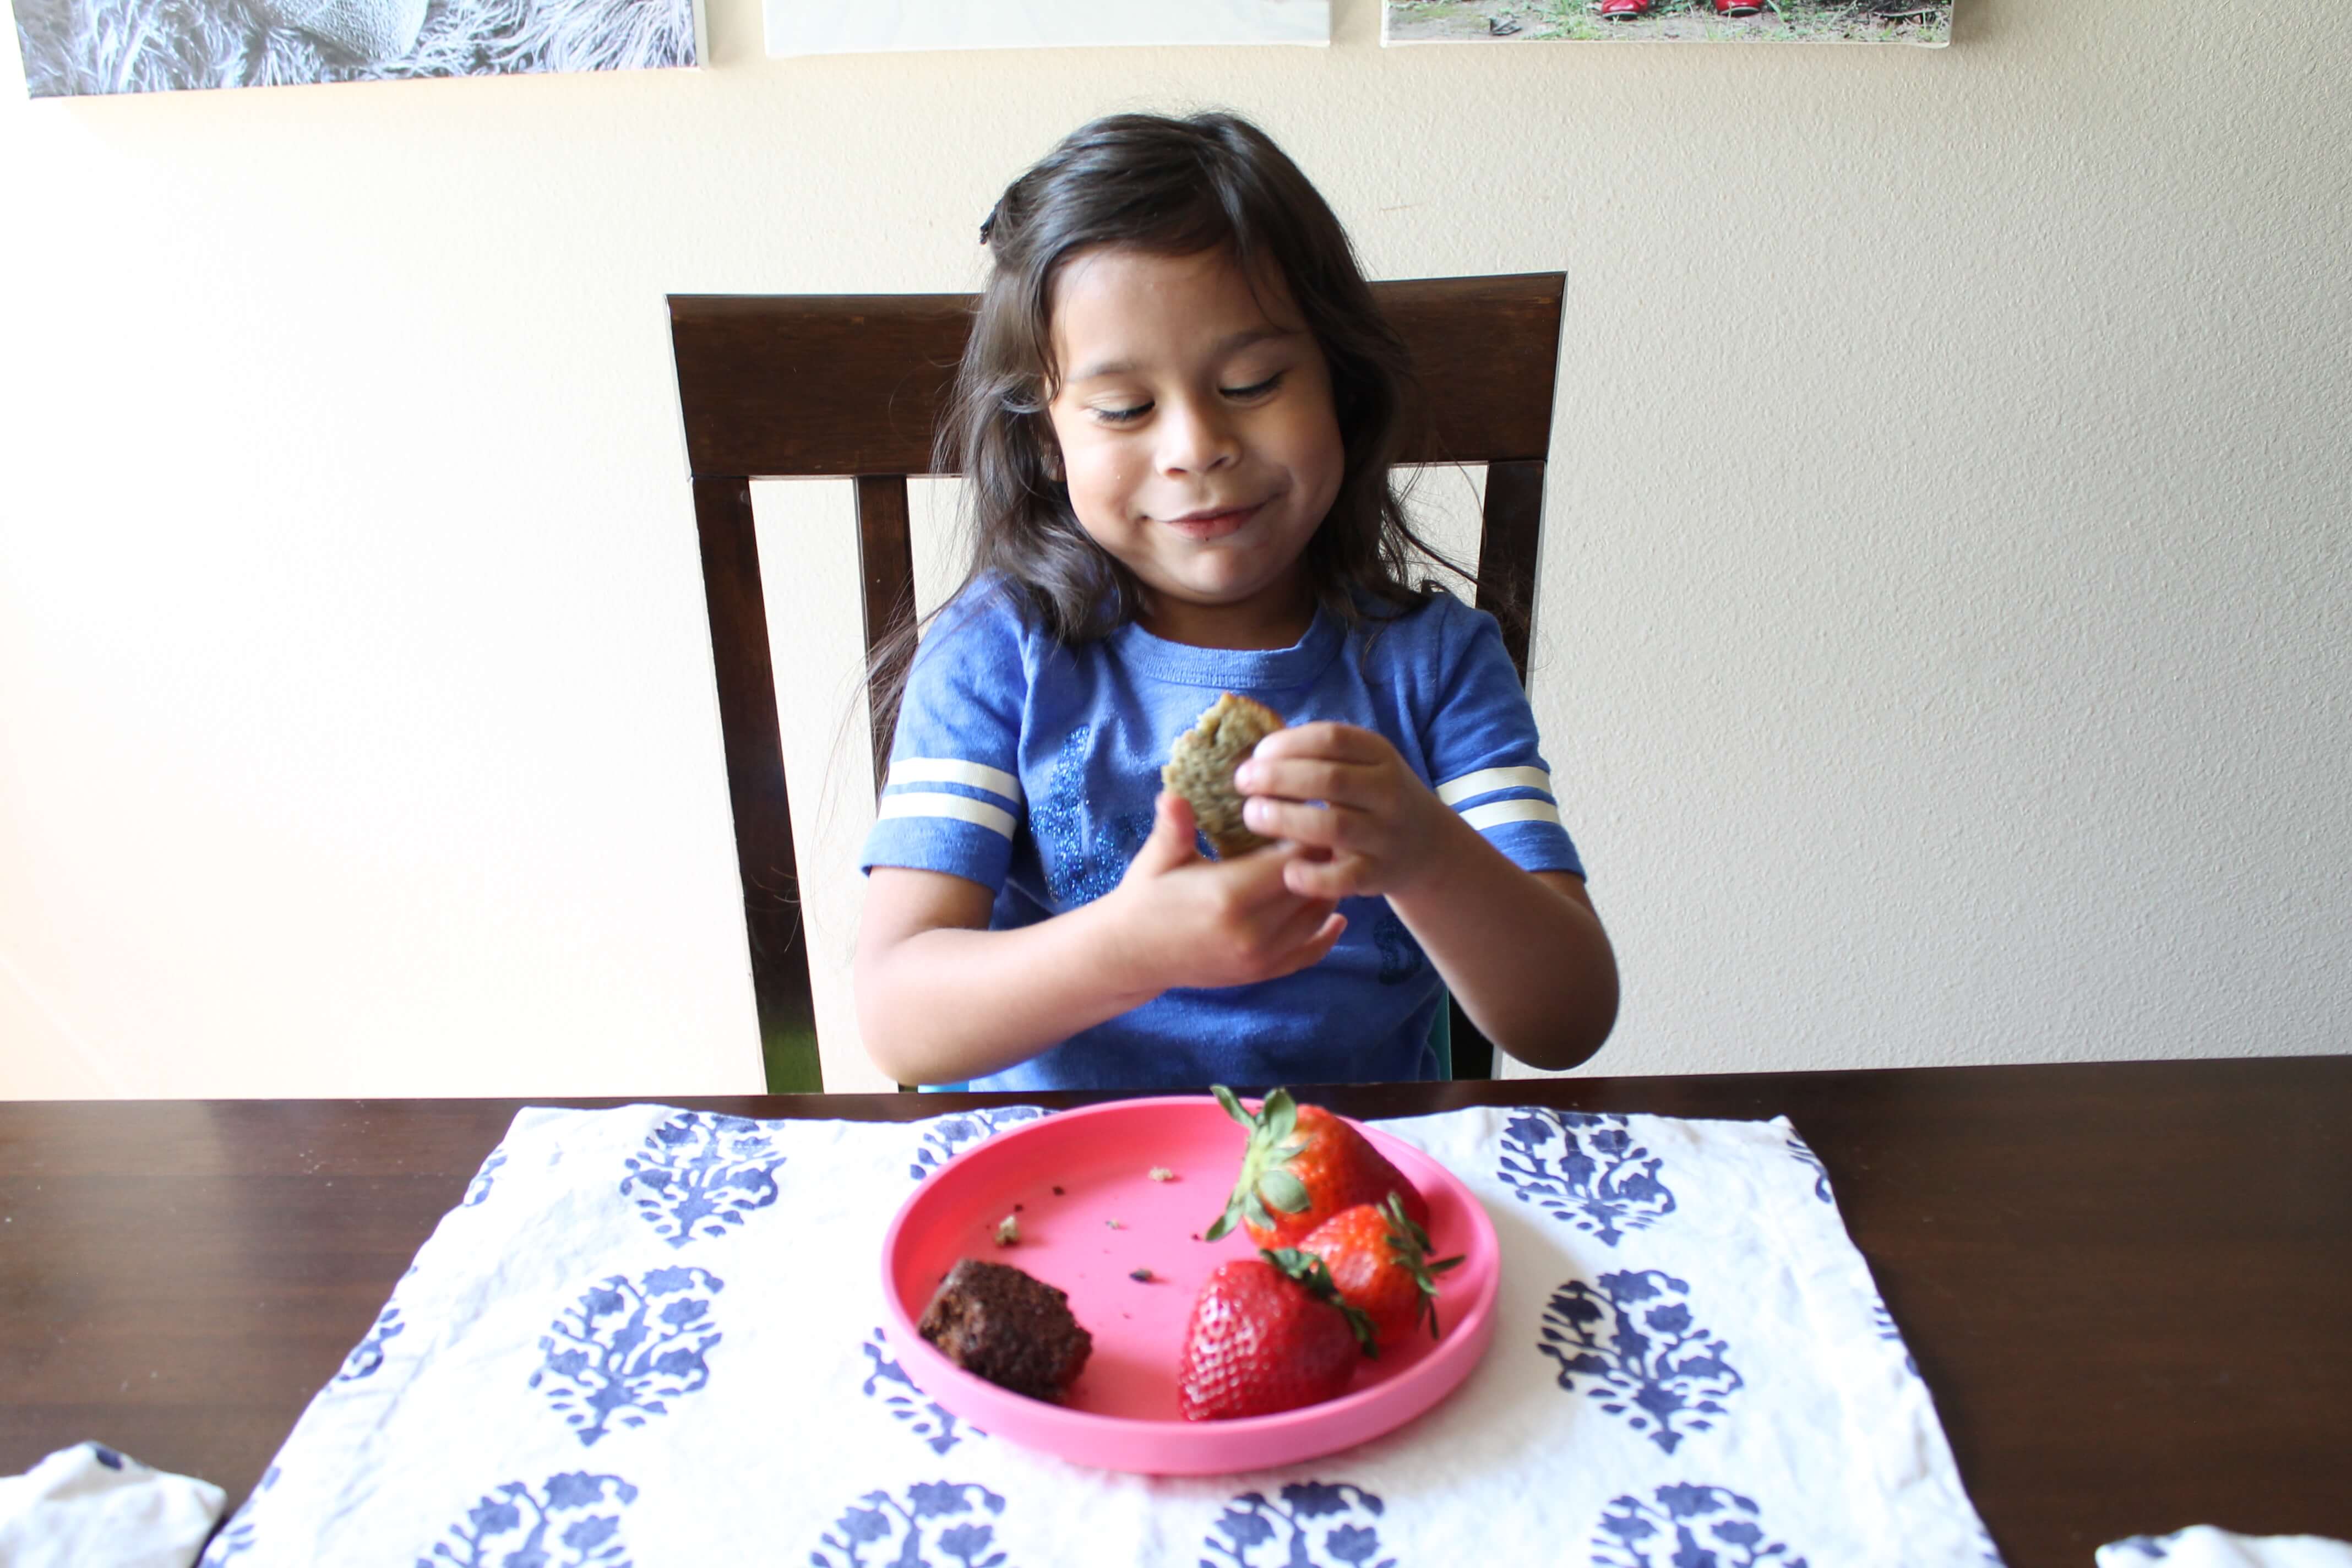 How to Get Your Kid To Eat More Vegetables. Best tips and mom hacks to get your child to eat more veggies. By moms for moms! #ad #hookedonveggies #gardenliteschallenge